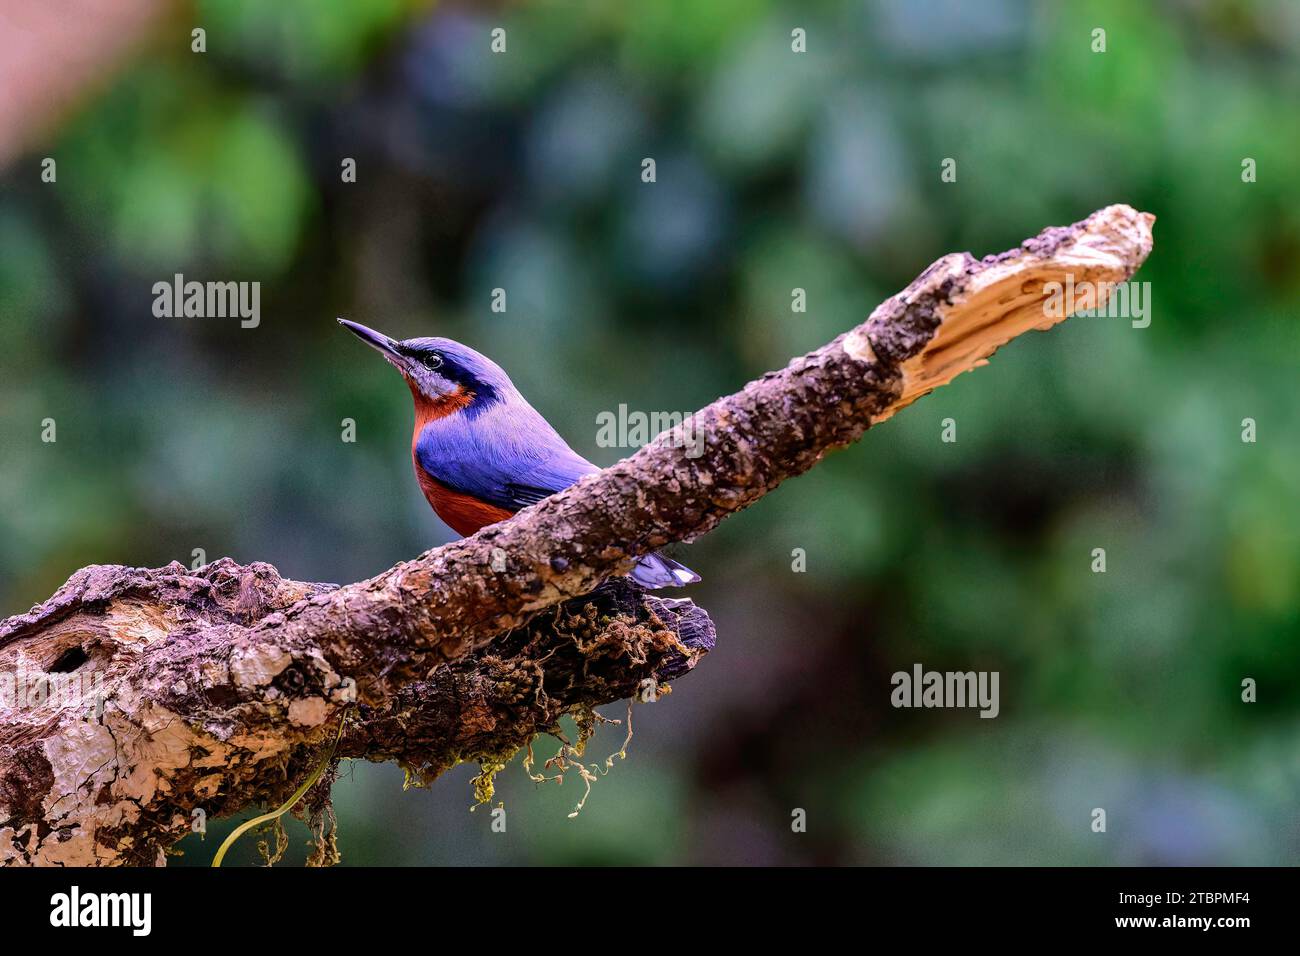 A Chestnut-Bellied Nuthatch perched on a tree branch in Sattal, Uttarakhand, India Stock Photo